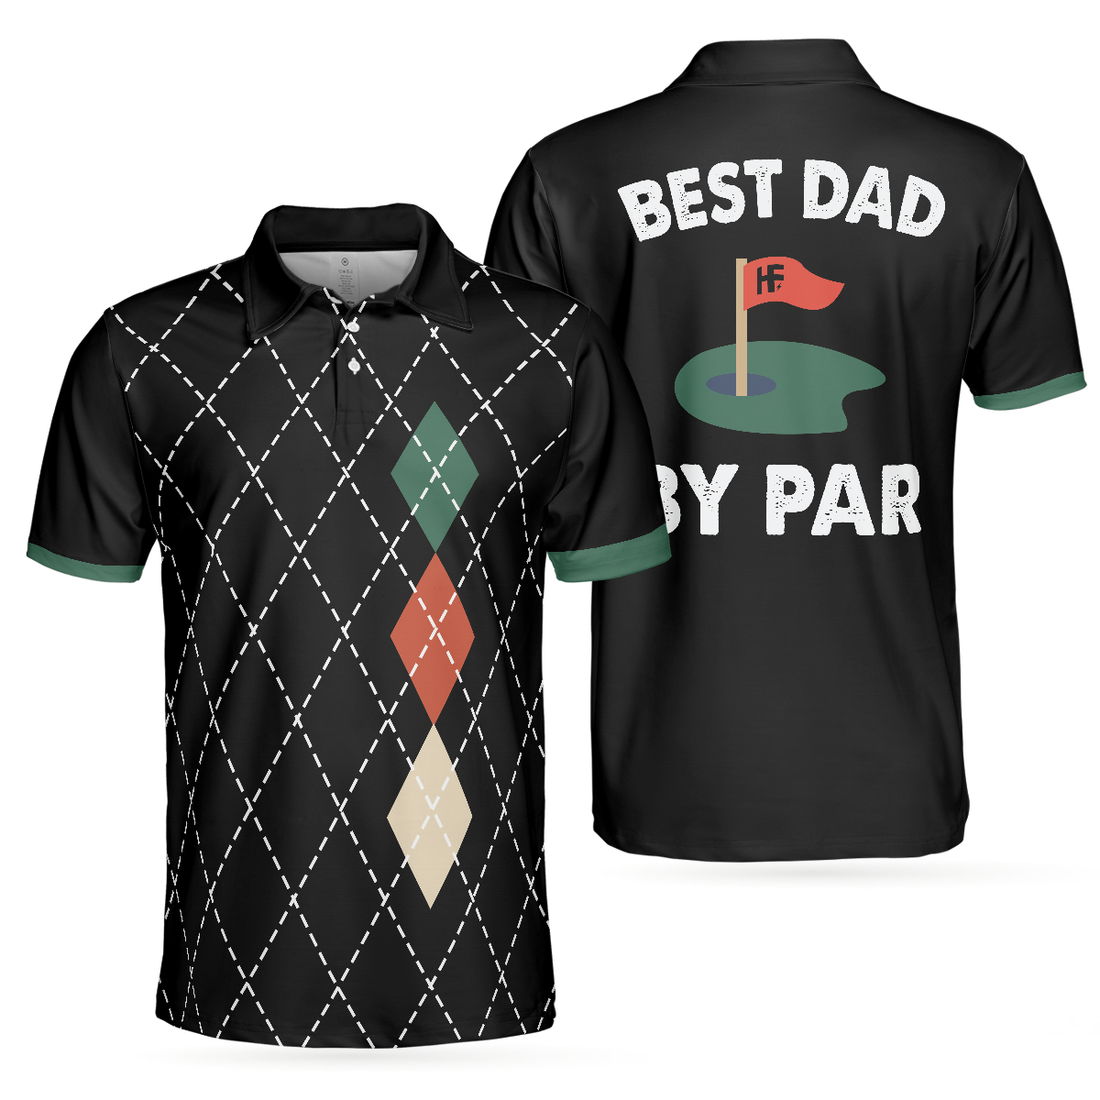 Best Dad By Par Polo Shirt Best Argyle Pattern Golf Shirt For Male Golf Gift Idea For Dad On Fathers Day - 1